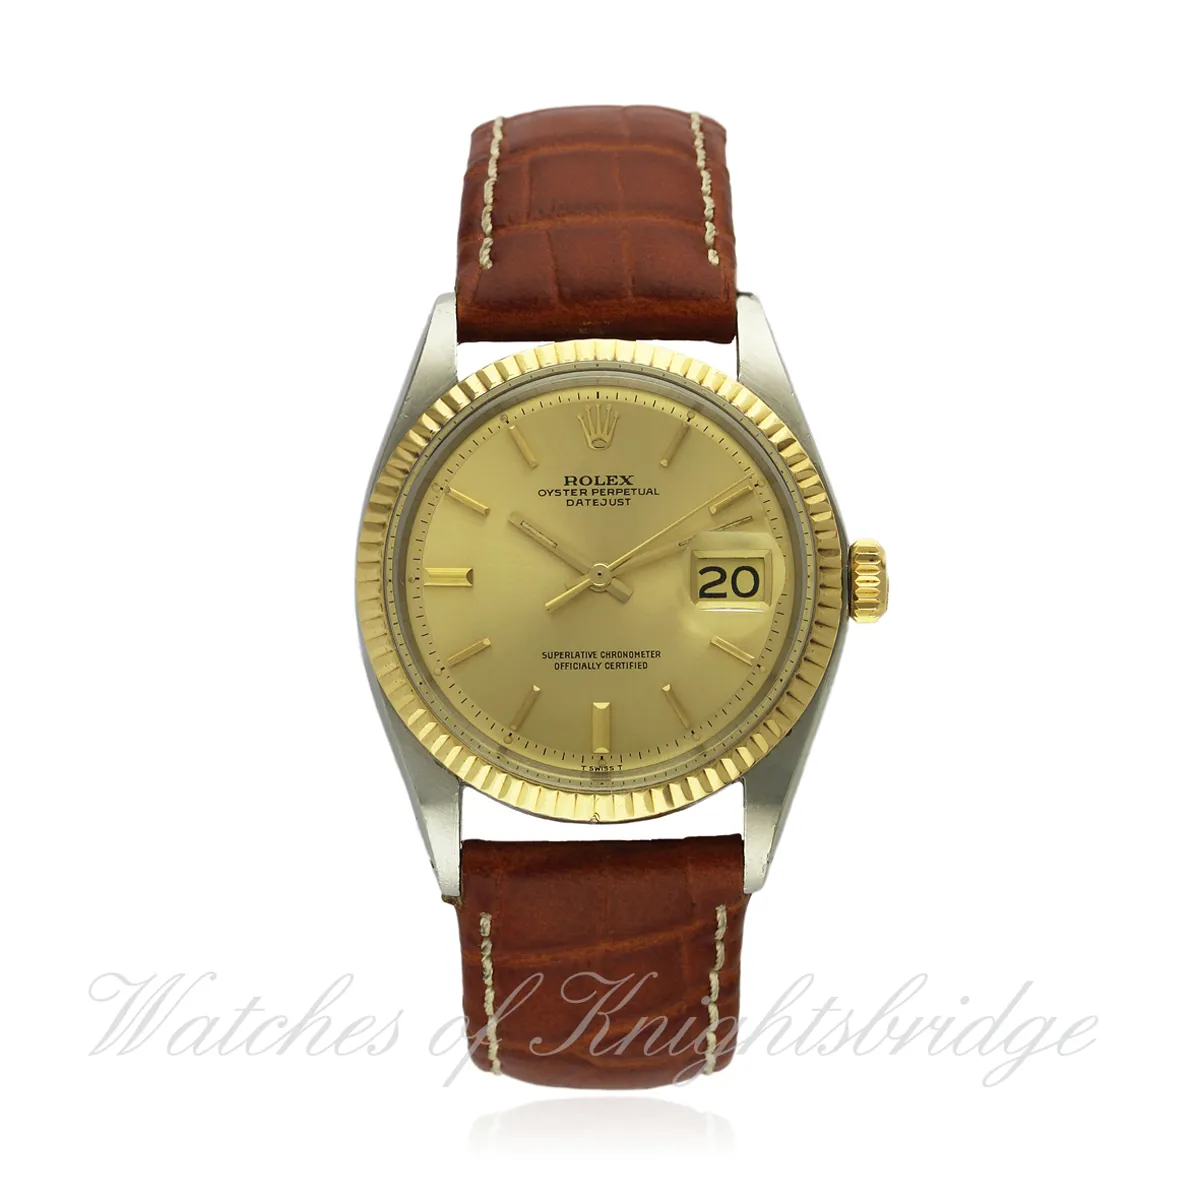 Rolex Datejust 36 1601 36mm Steel and gold Champagne